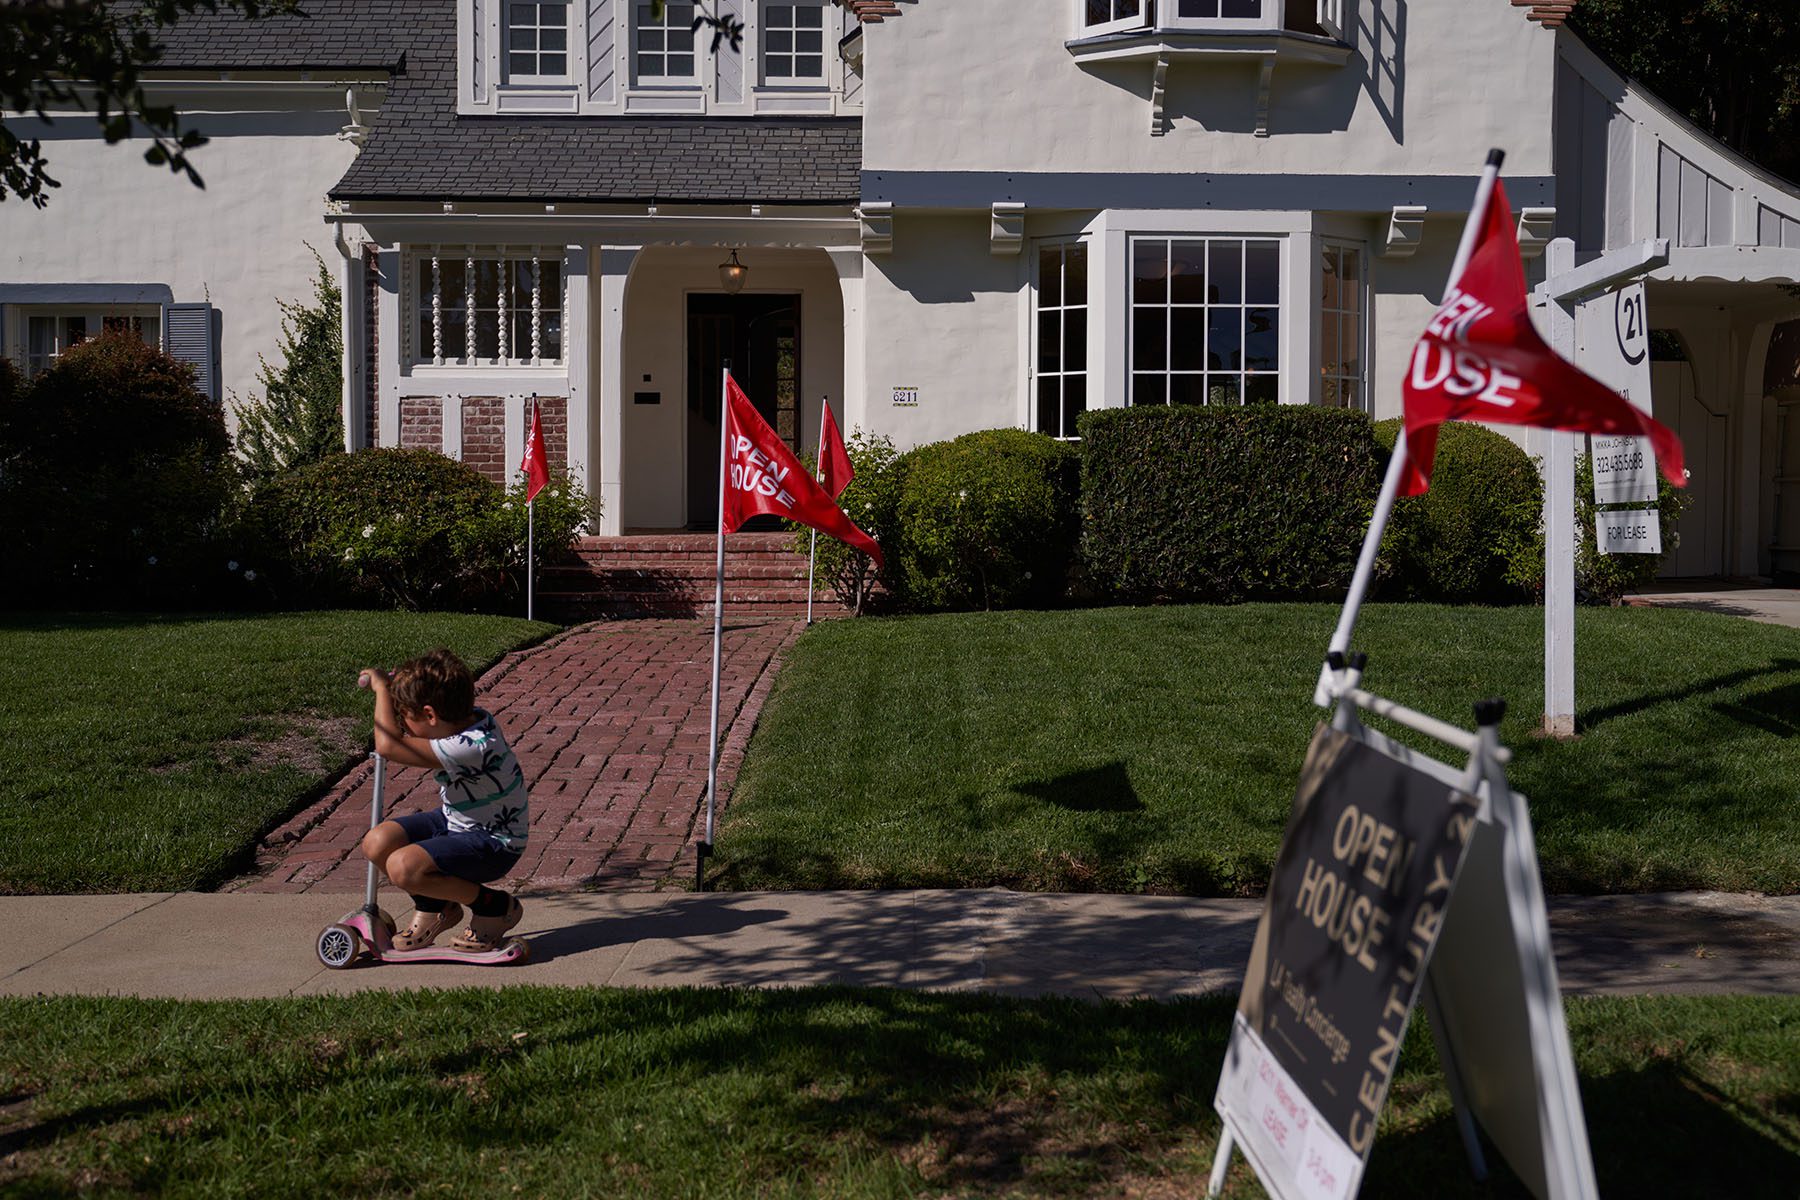 A child rides a scooter past "open house" flags displayed outside a single family home.